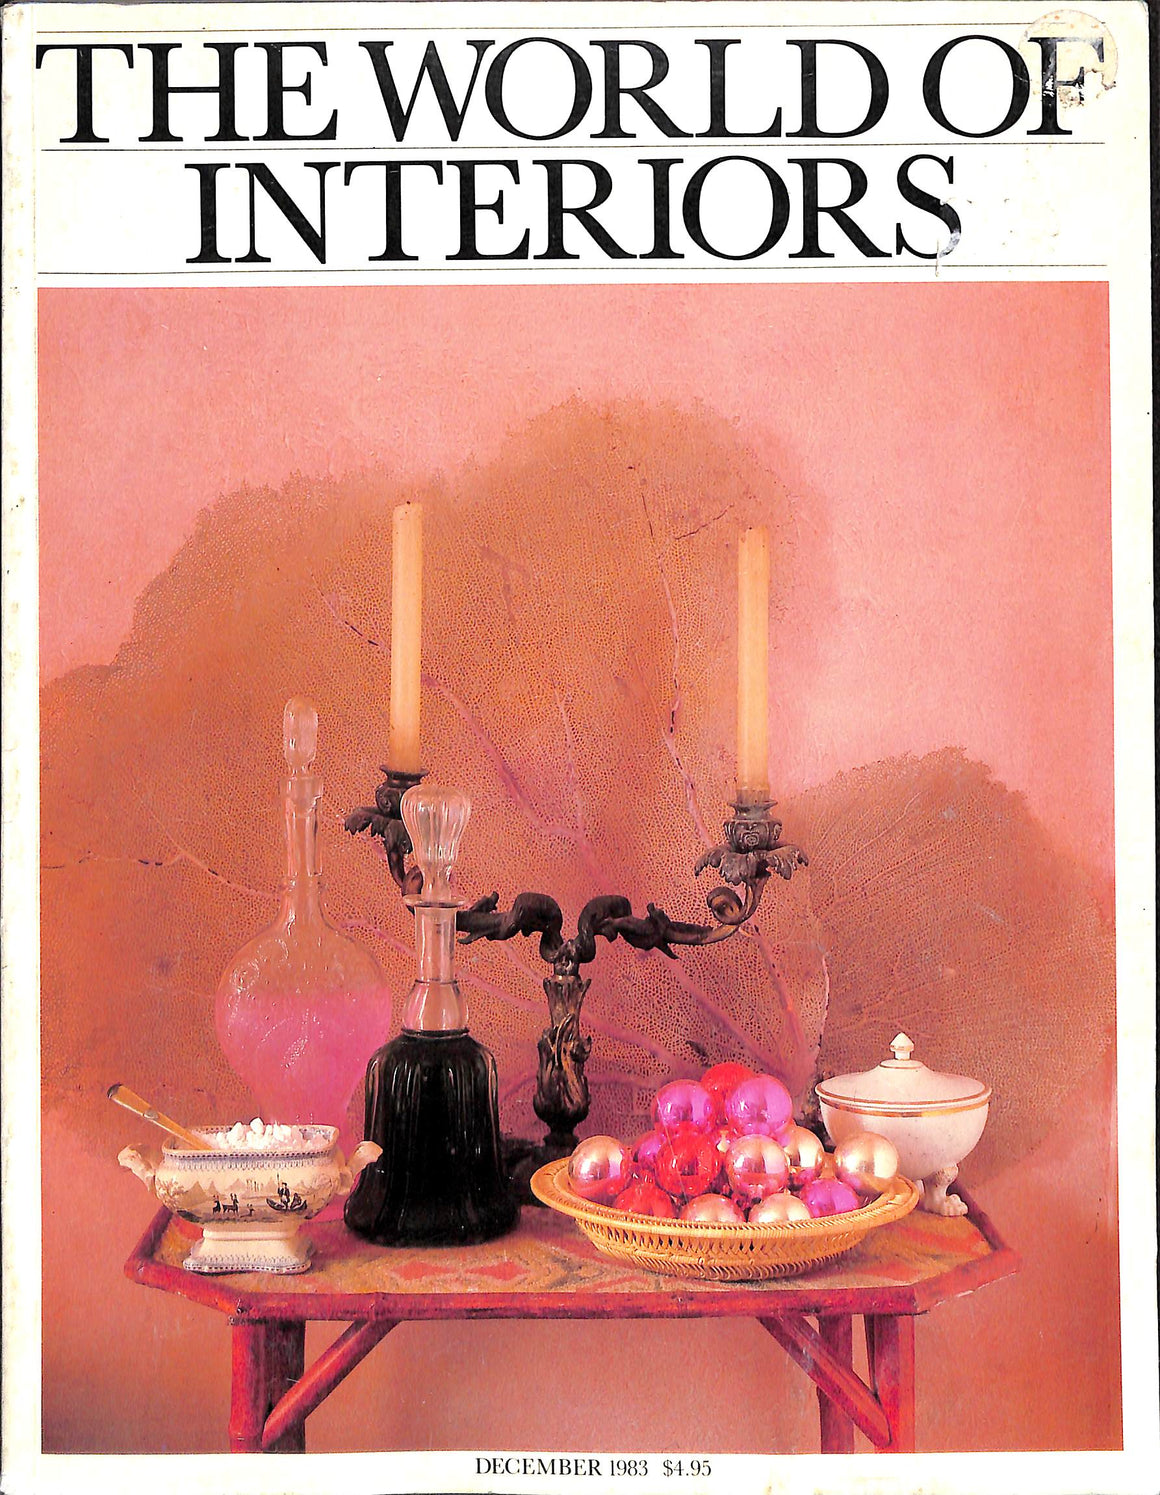 The World Of Interiors December 1983 (SOLD)